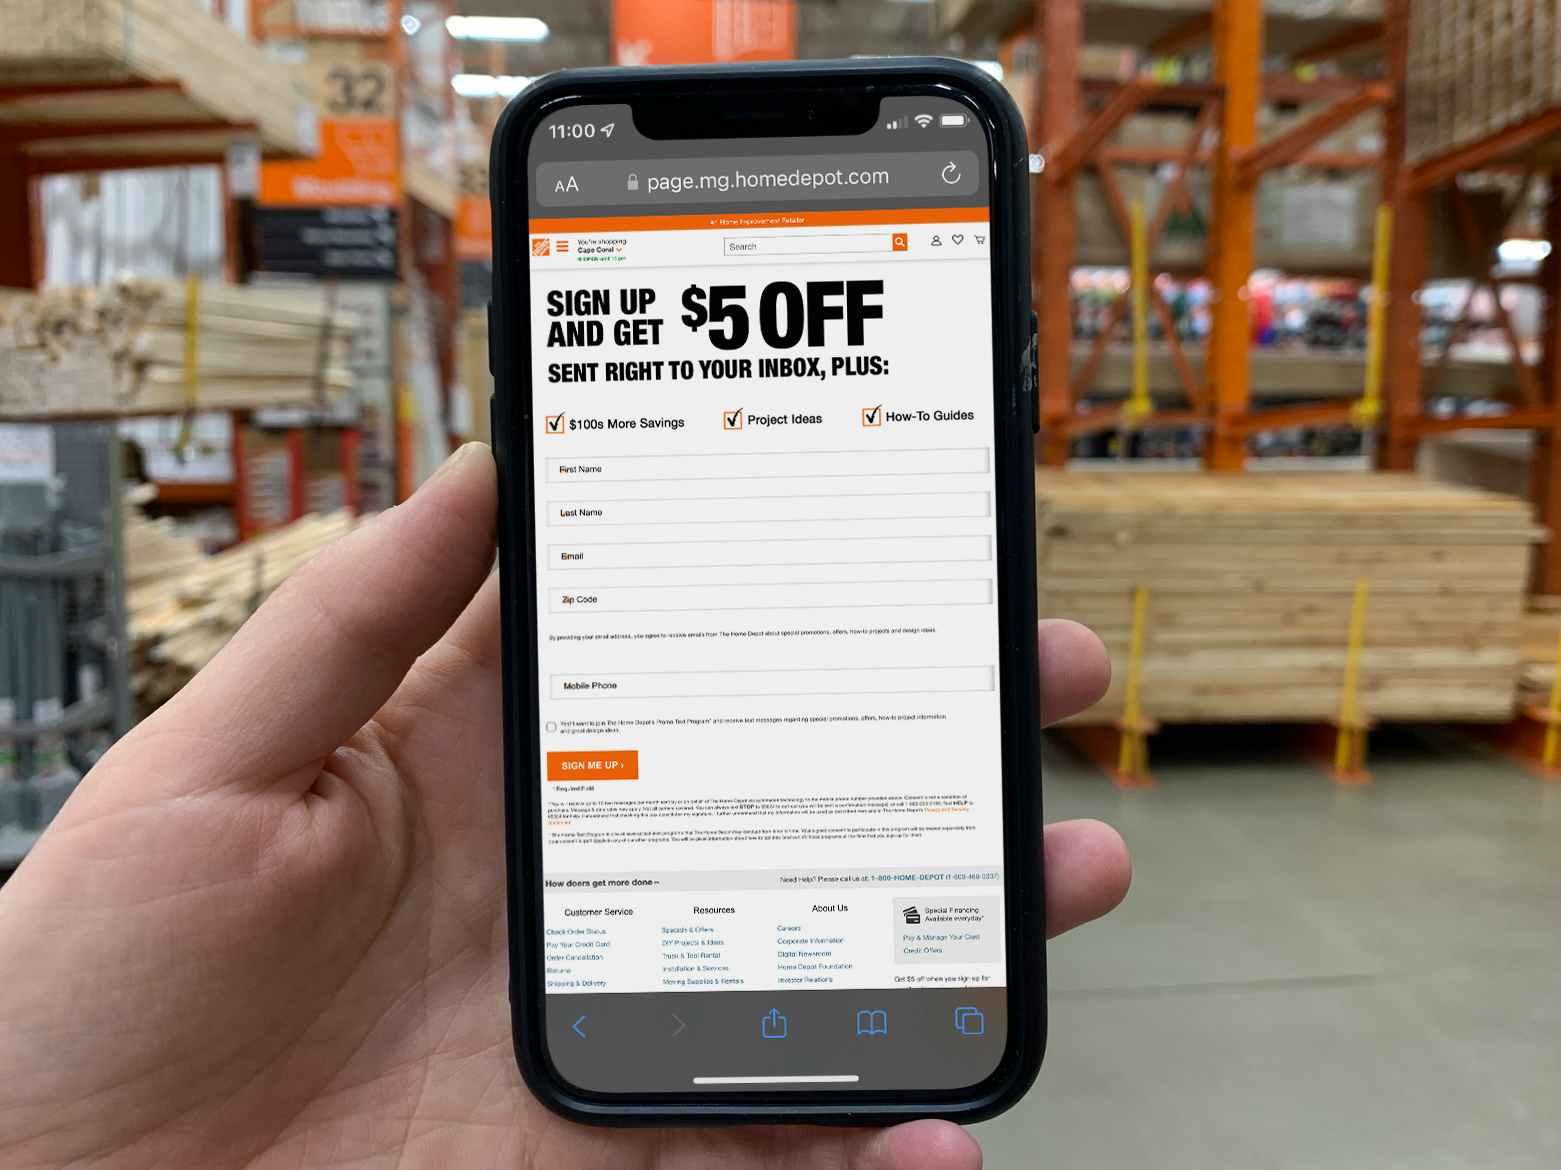 A person holding up a cell phone displaying the garden club sign up page on Home Depot's website offering a $5 off coupon